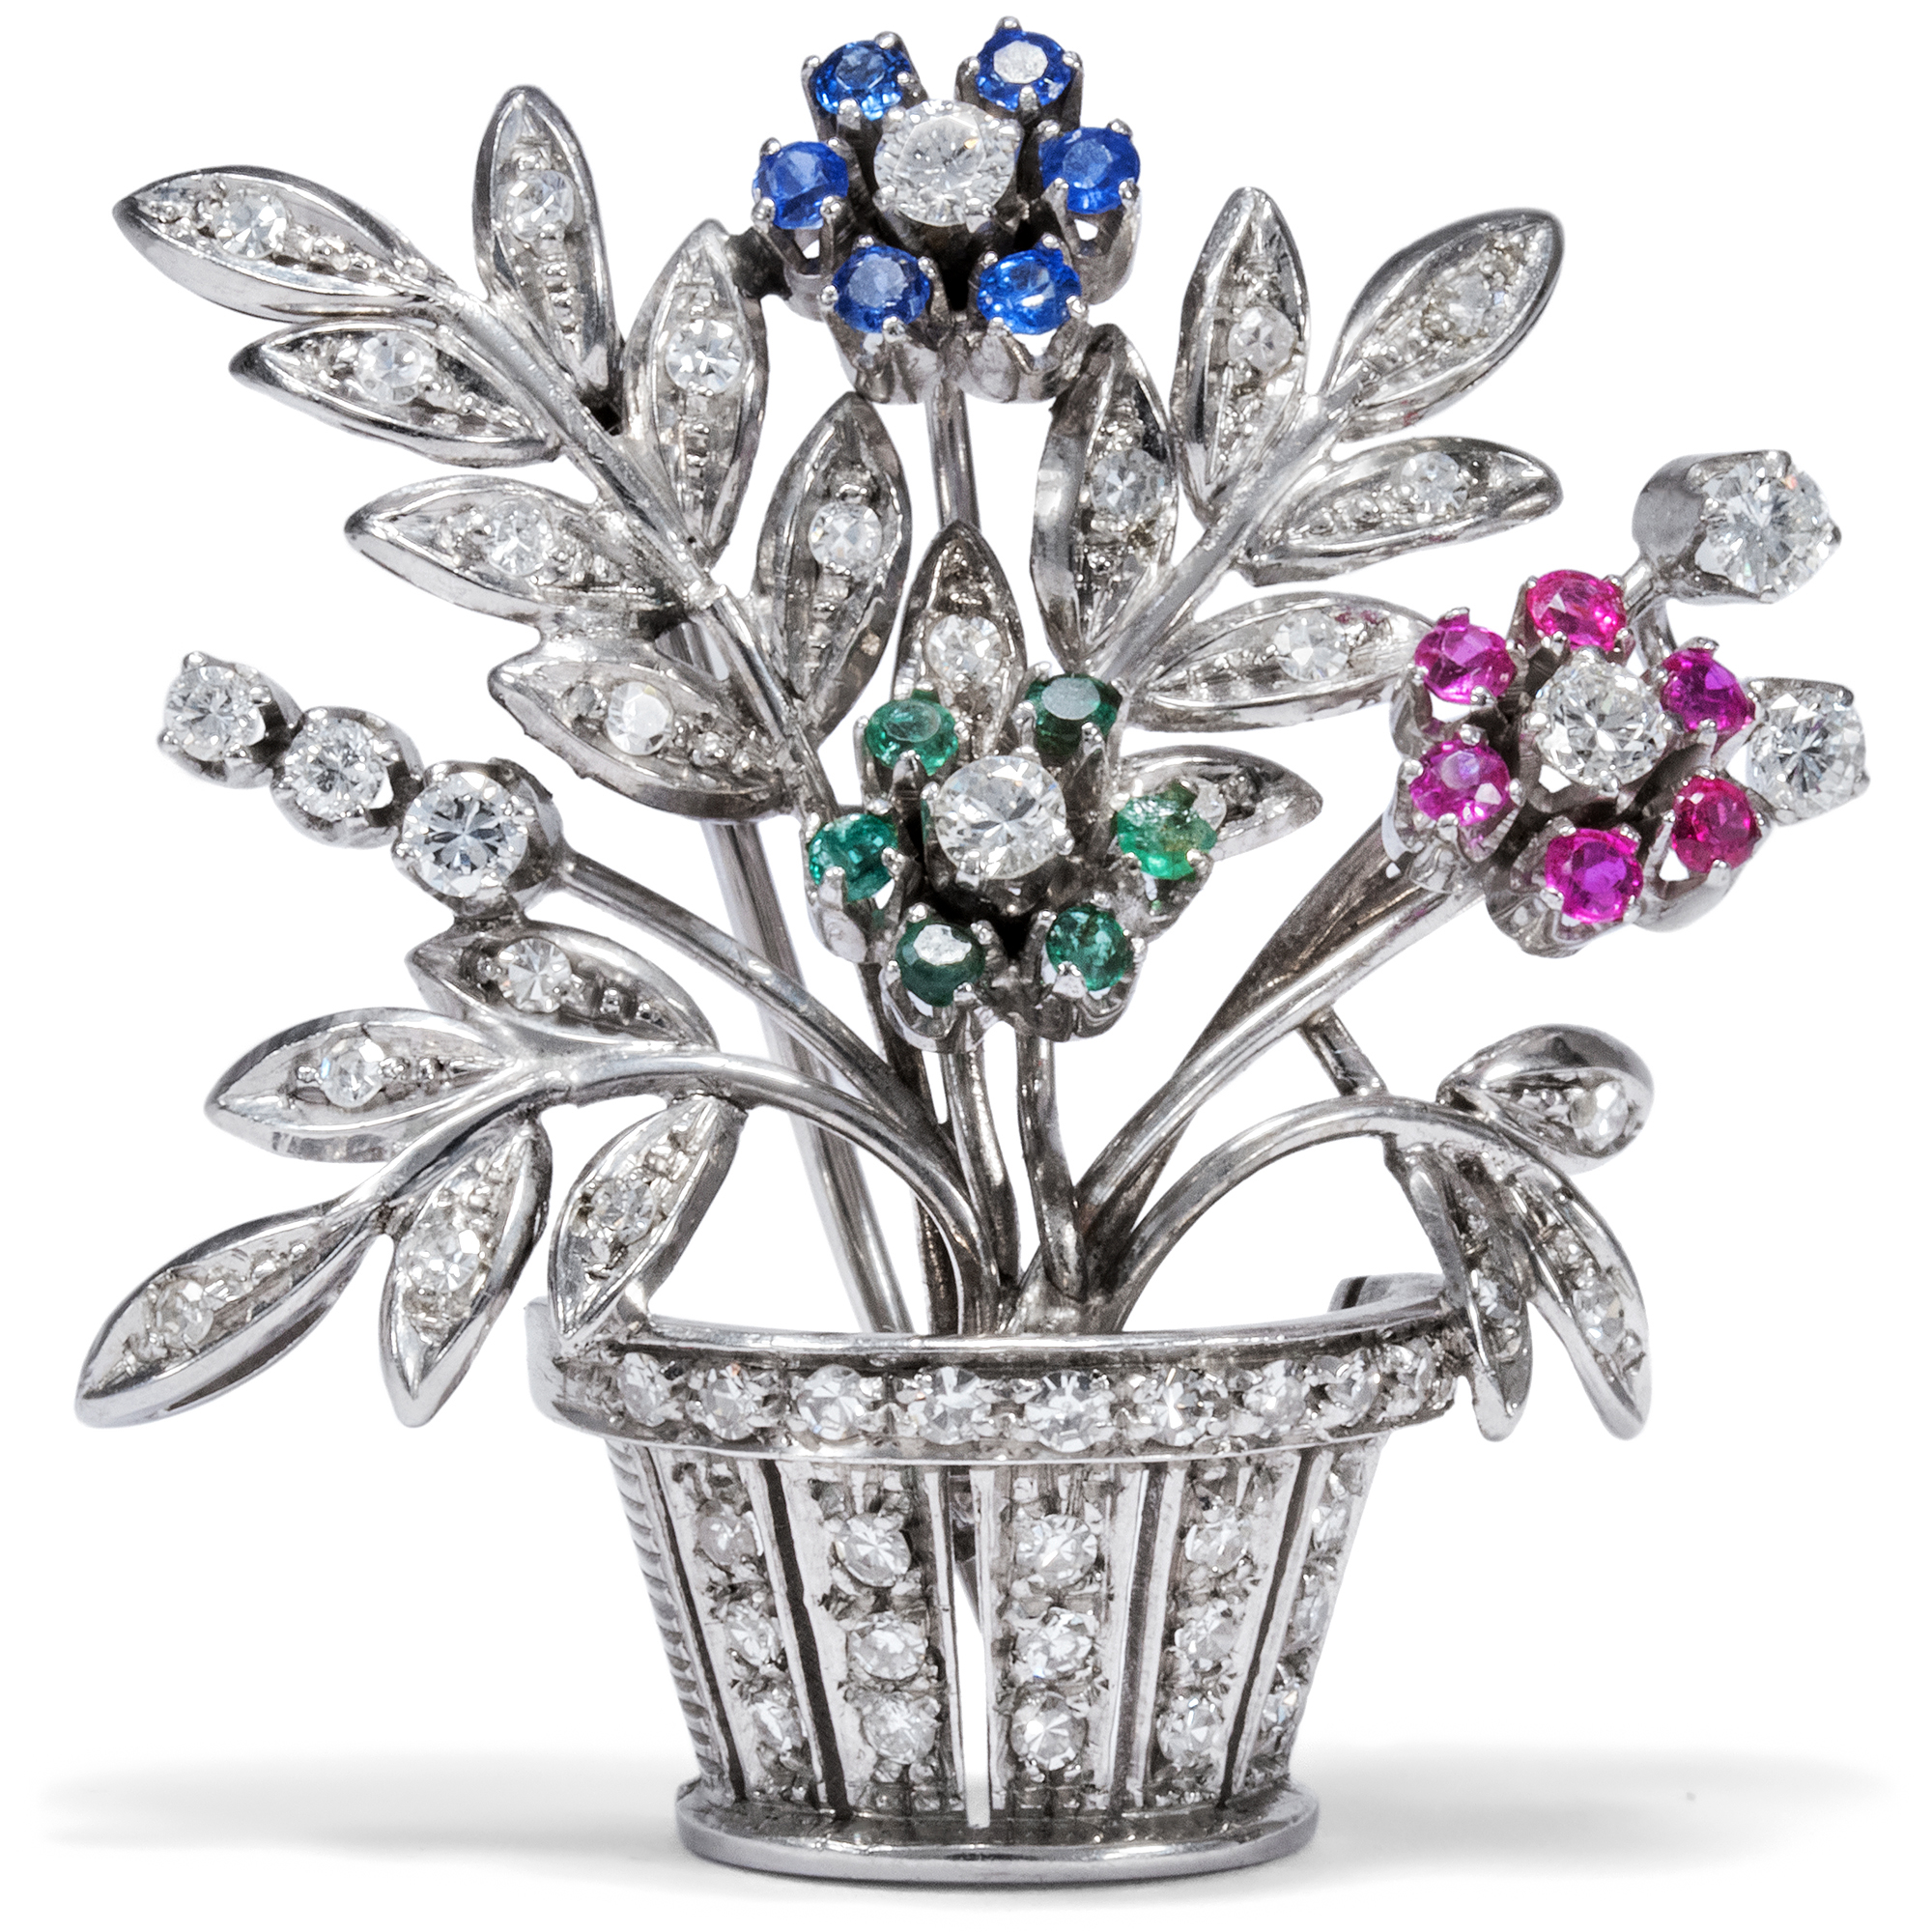 Luxurious White Gold Brooch With Rubies, Sapphires, Emeralds & Diamonds, Circa 1965